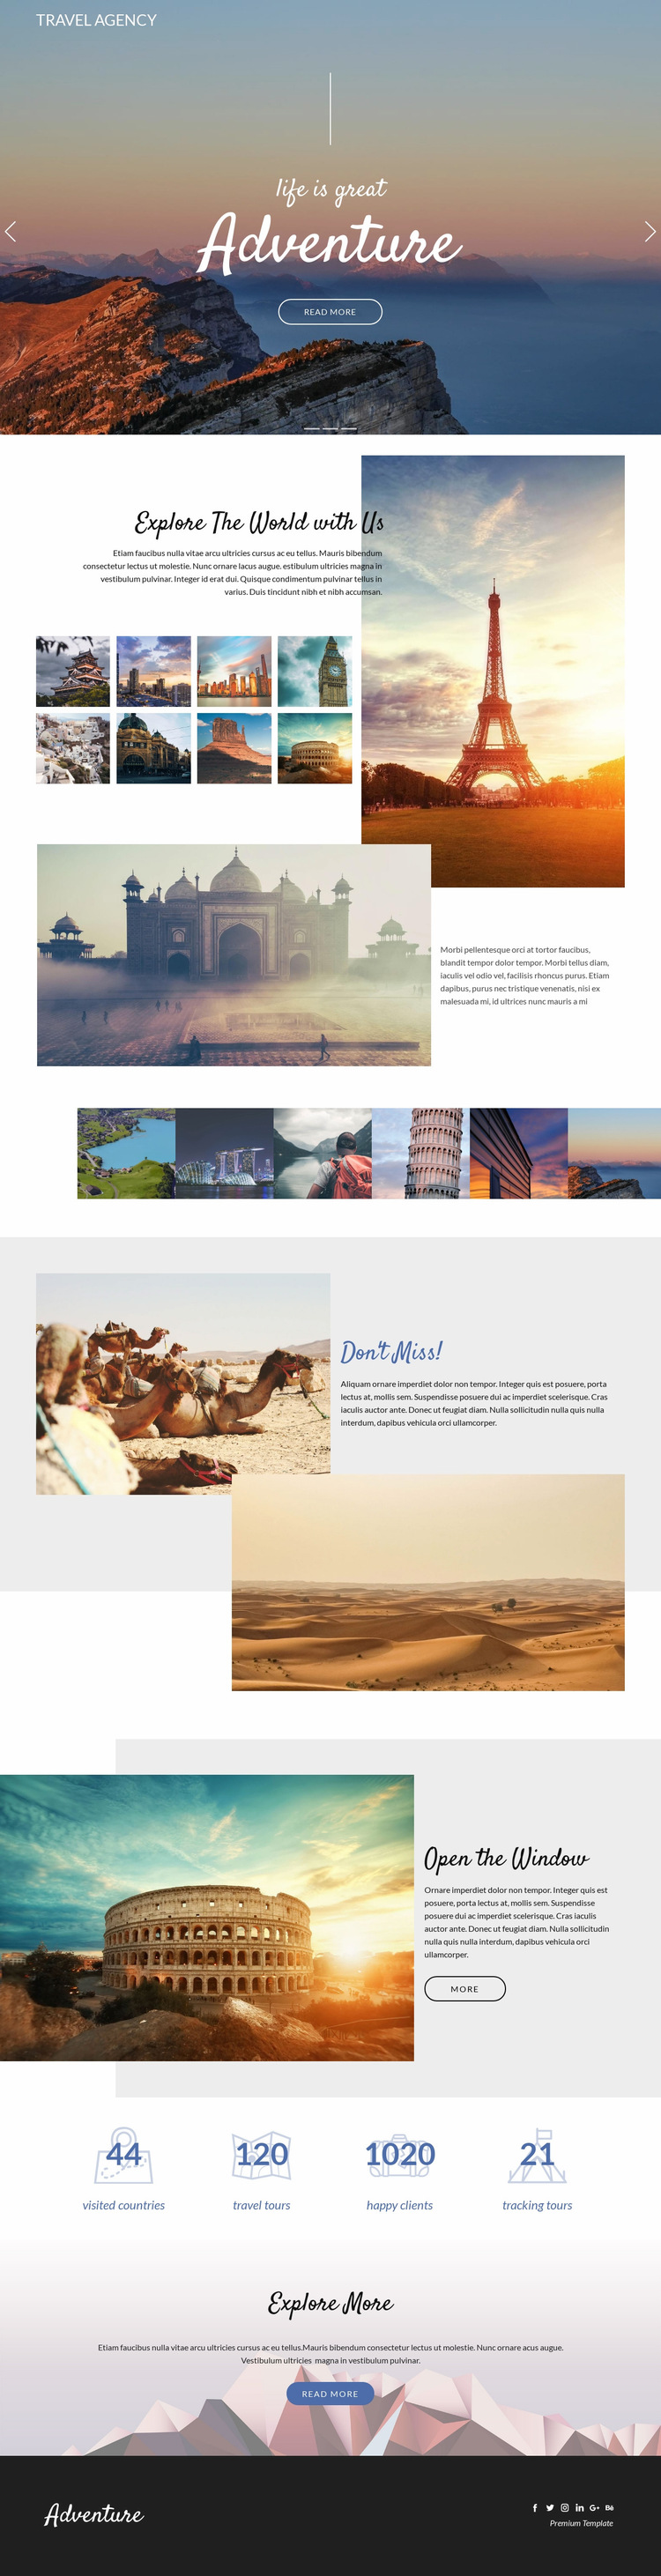 Adventure and travel Web Page Design